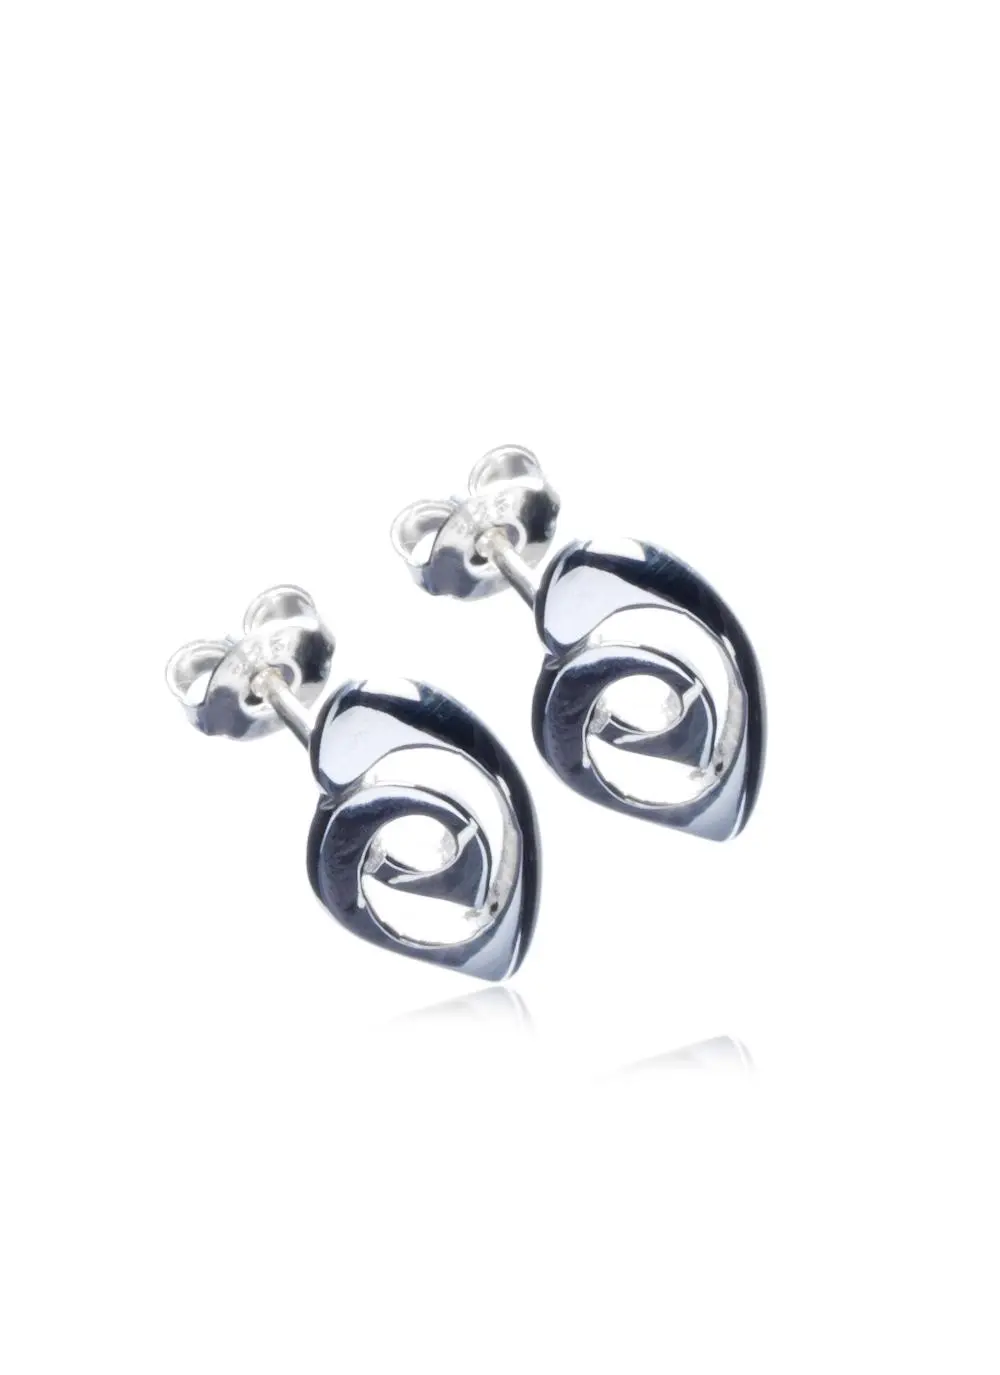 White background cut out shot of Celtic Knot Sterling Silver Stud Earrings